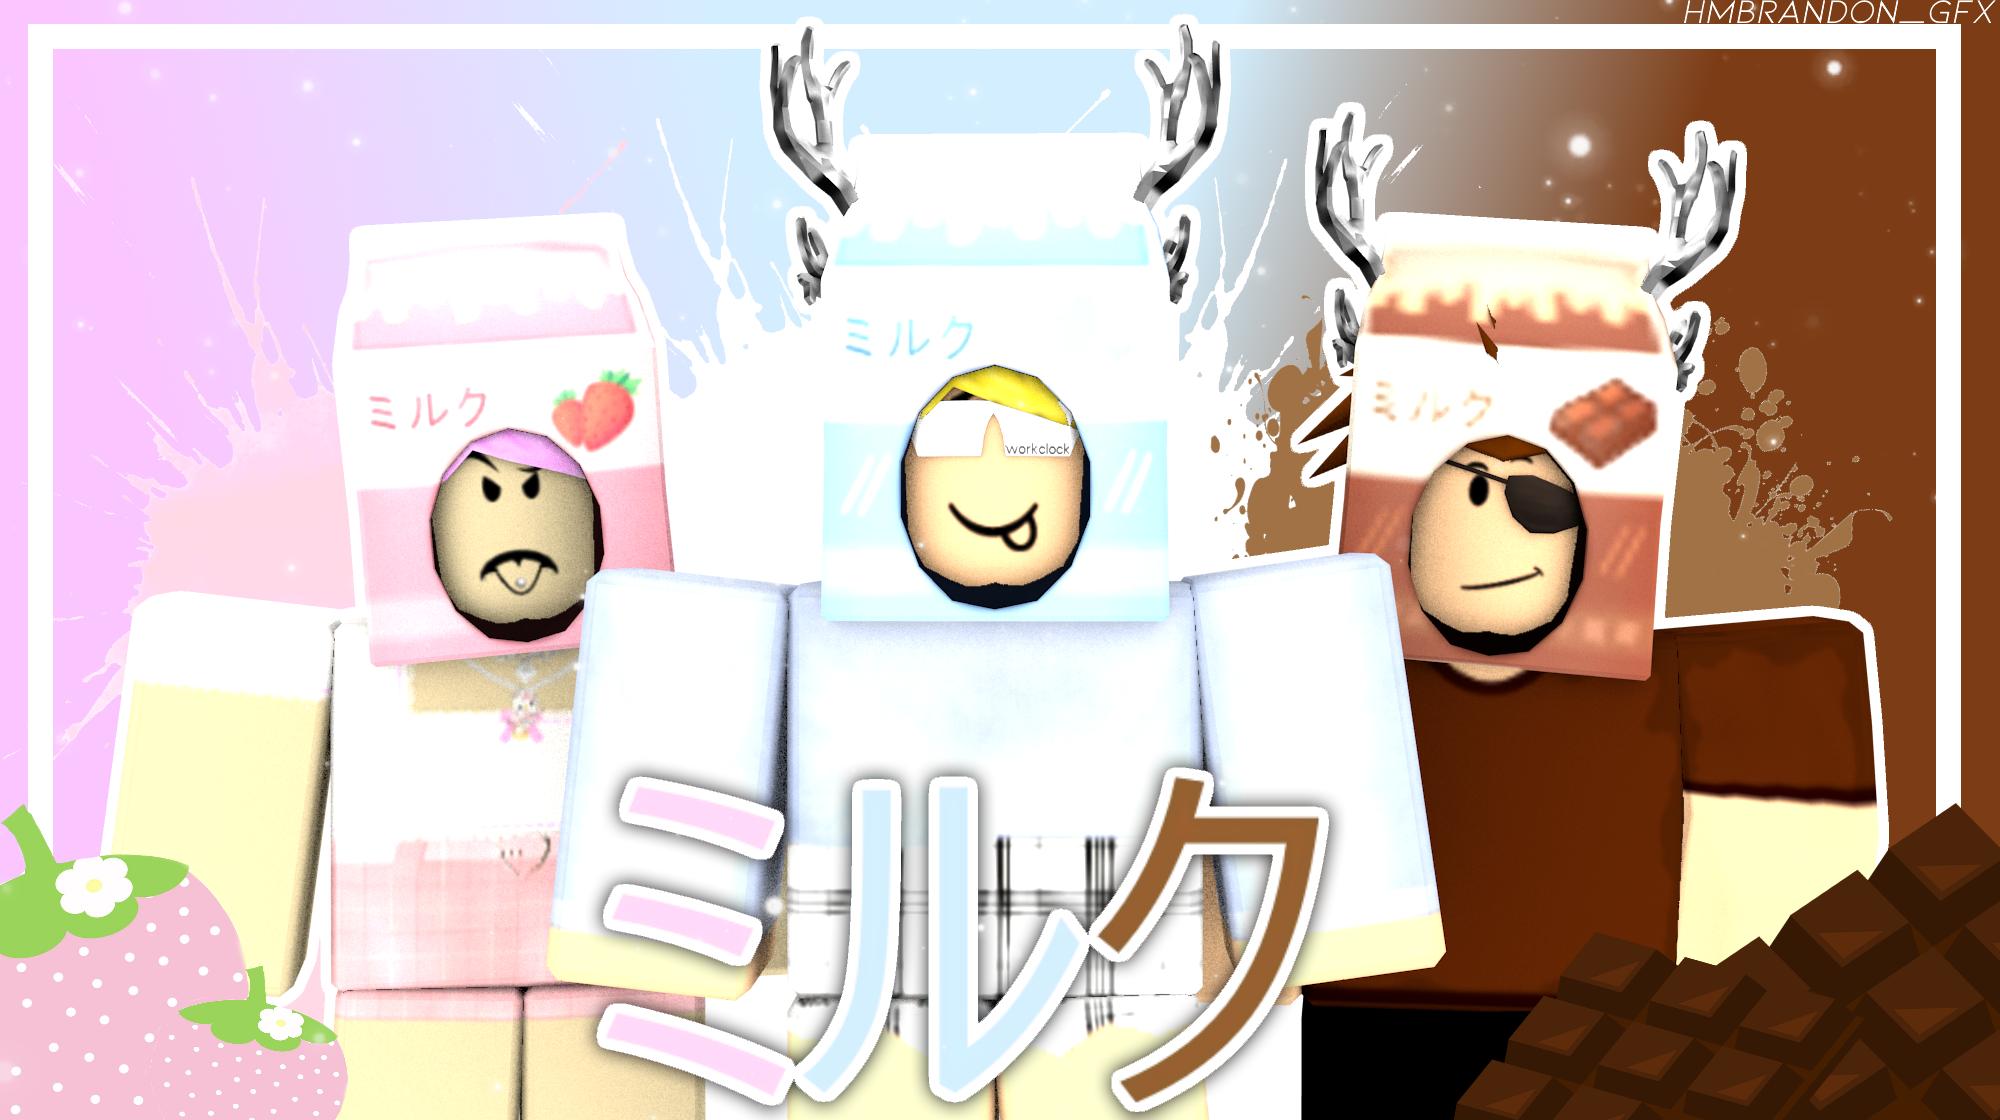 Brandongfx Comms Opened On Twitter Fancy Some Milk Or A Delicious Chocolate Or Strawberry Flavored Milk I Used Evilartist S Milk Hats To Make This New Gfx Hope You Like It Roblox - chocolate milk roblox id